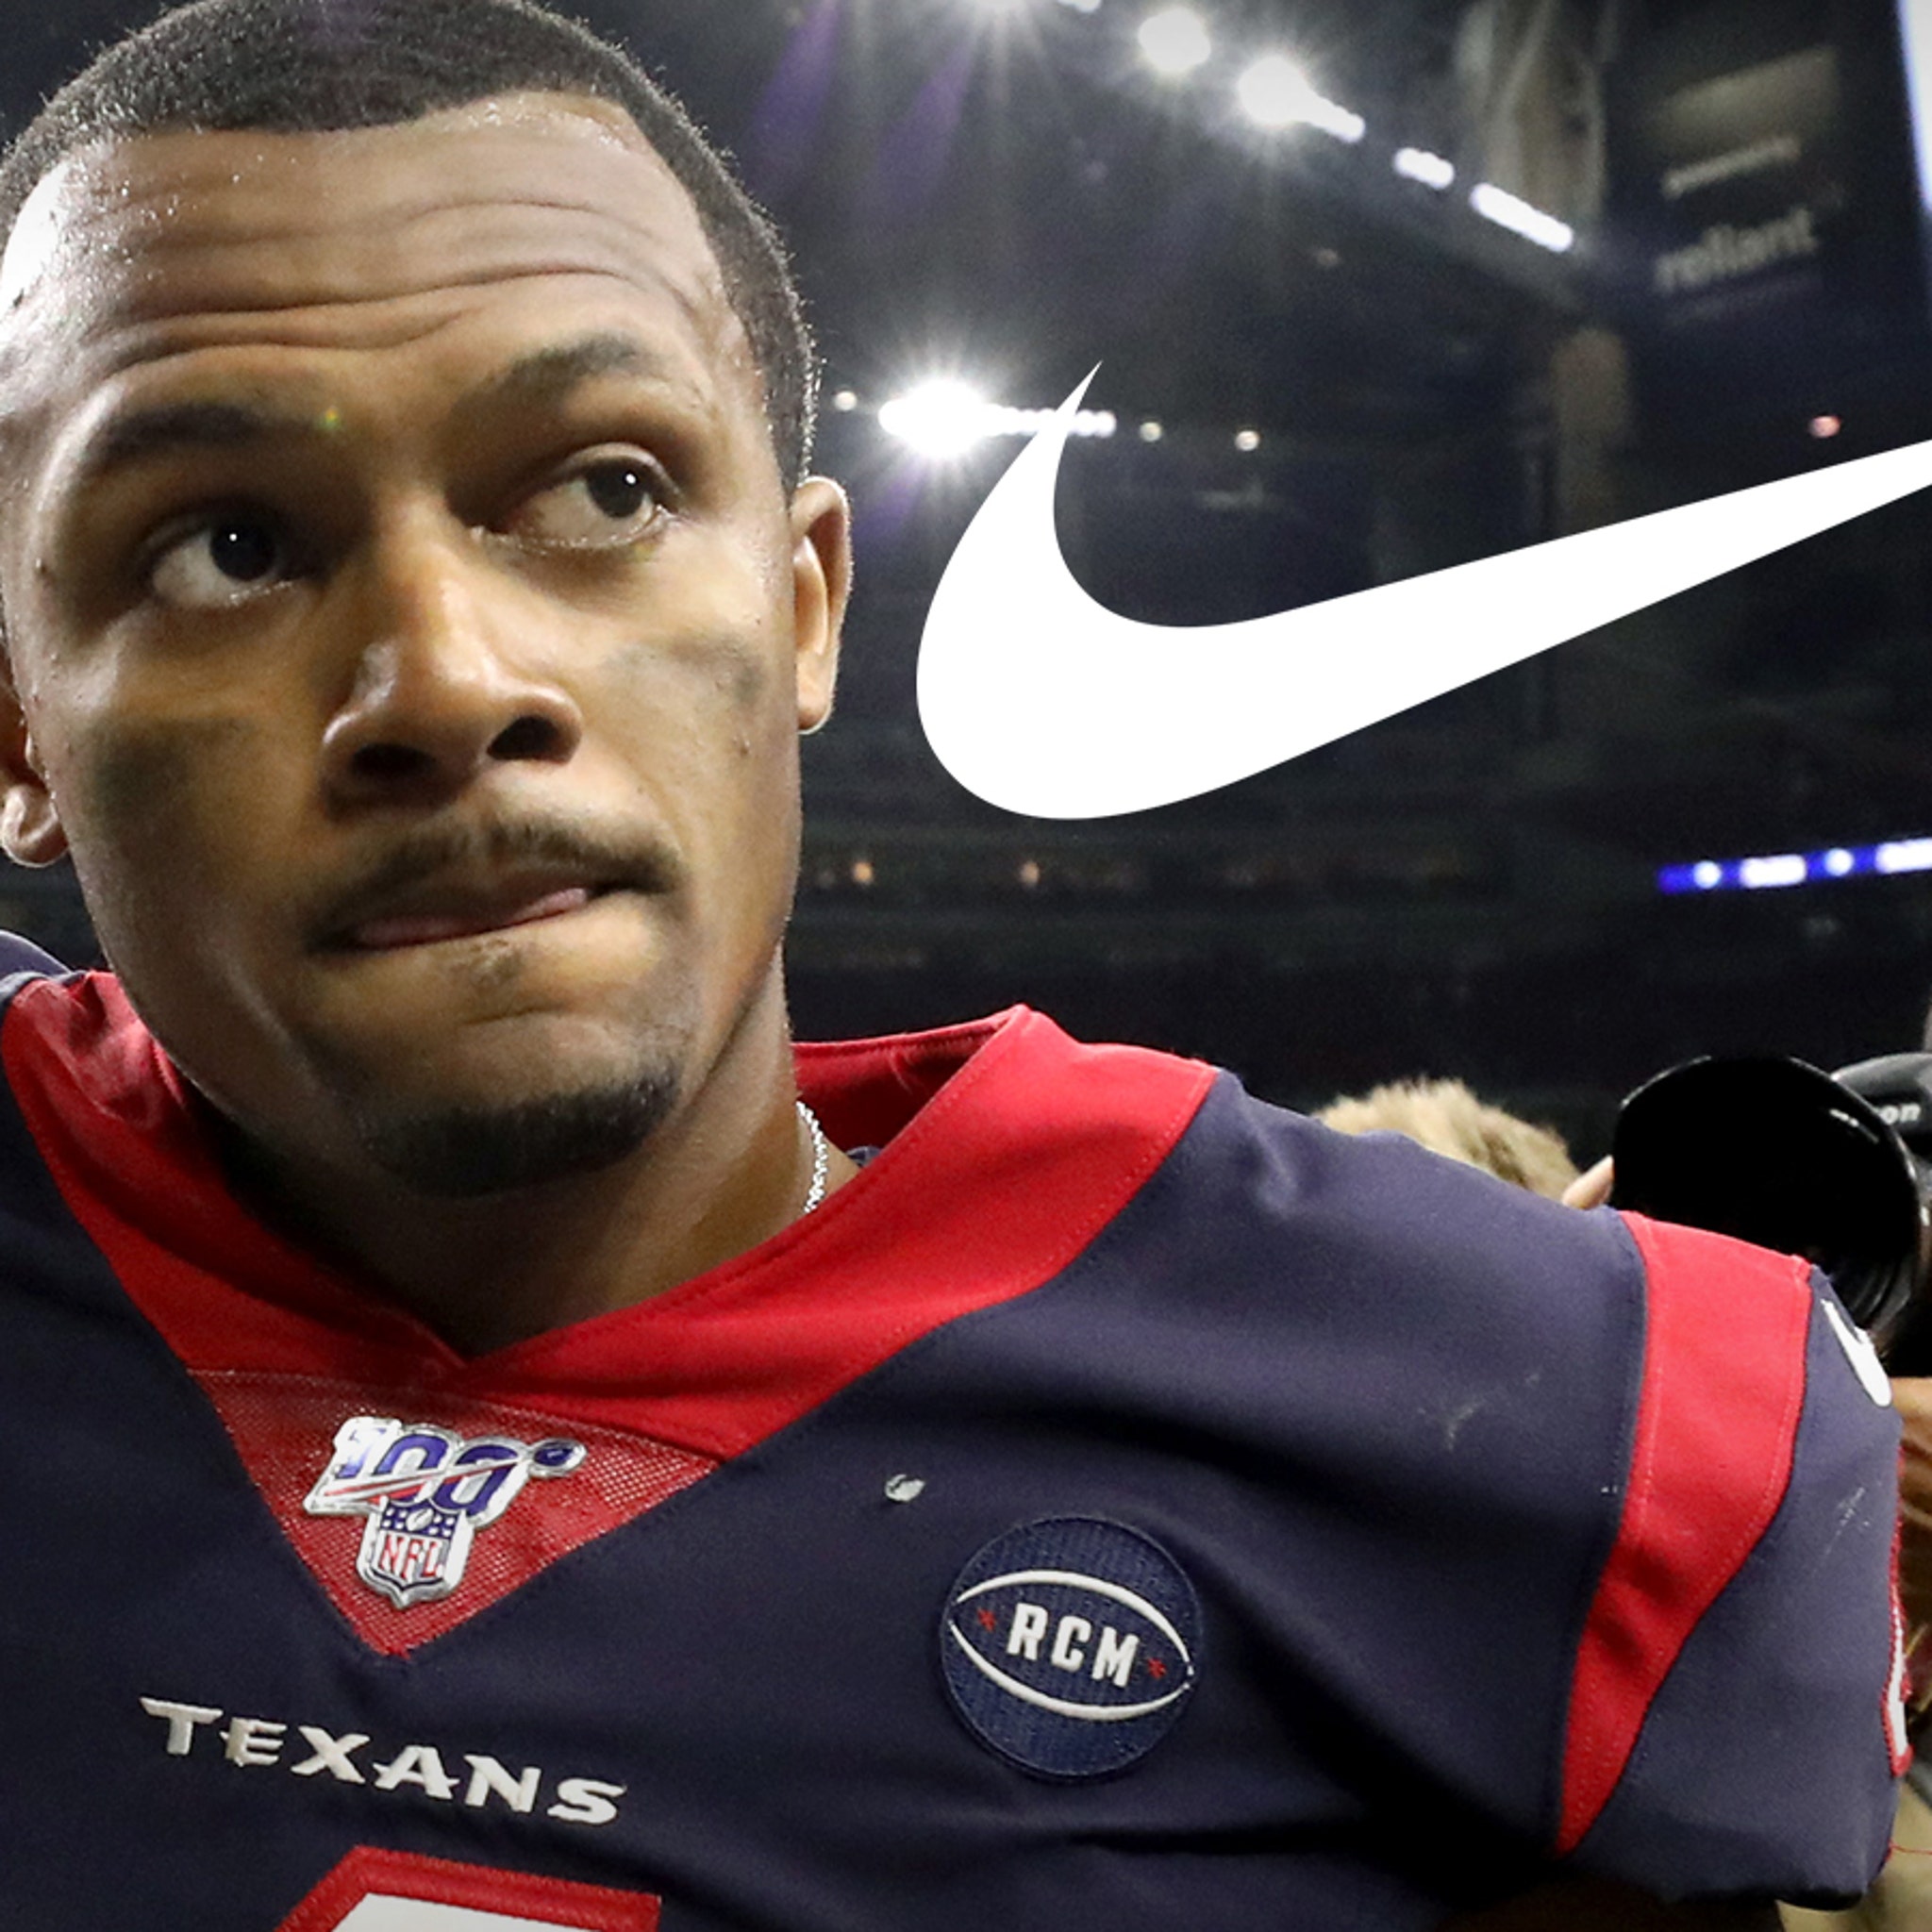 Suspends Deal with Deshaun Over Allegations